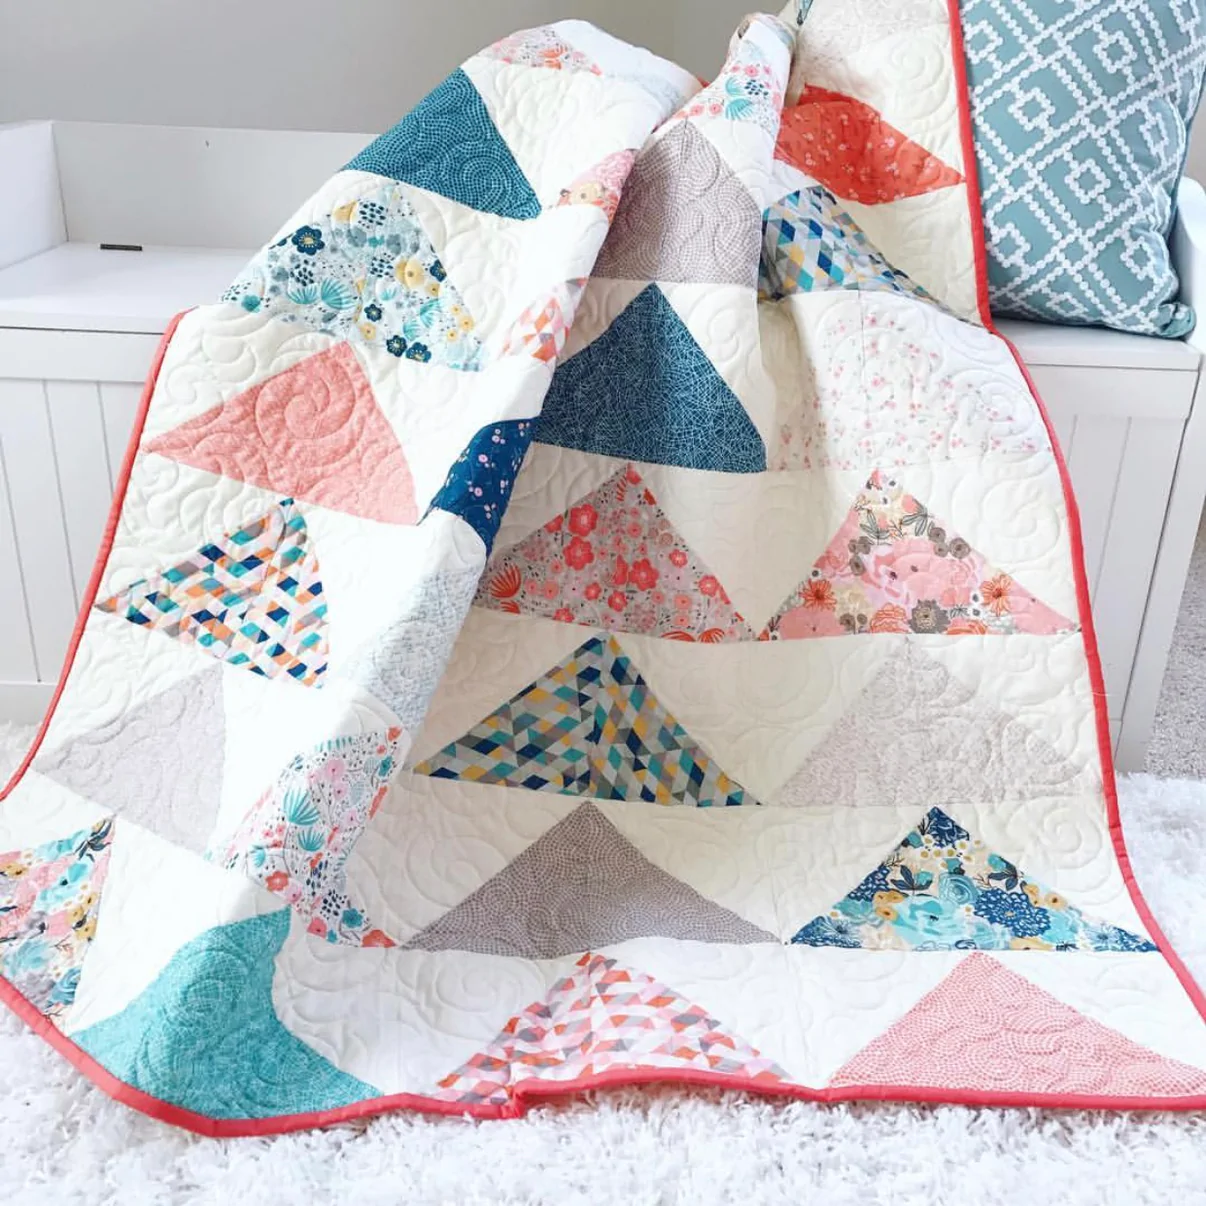 A Triangle Quilt